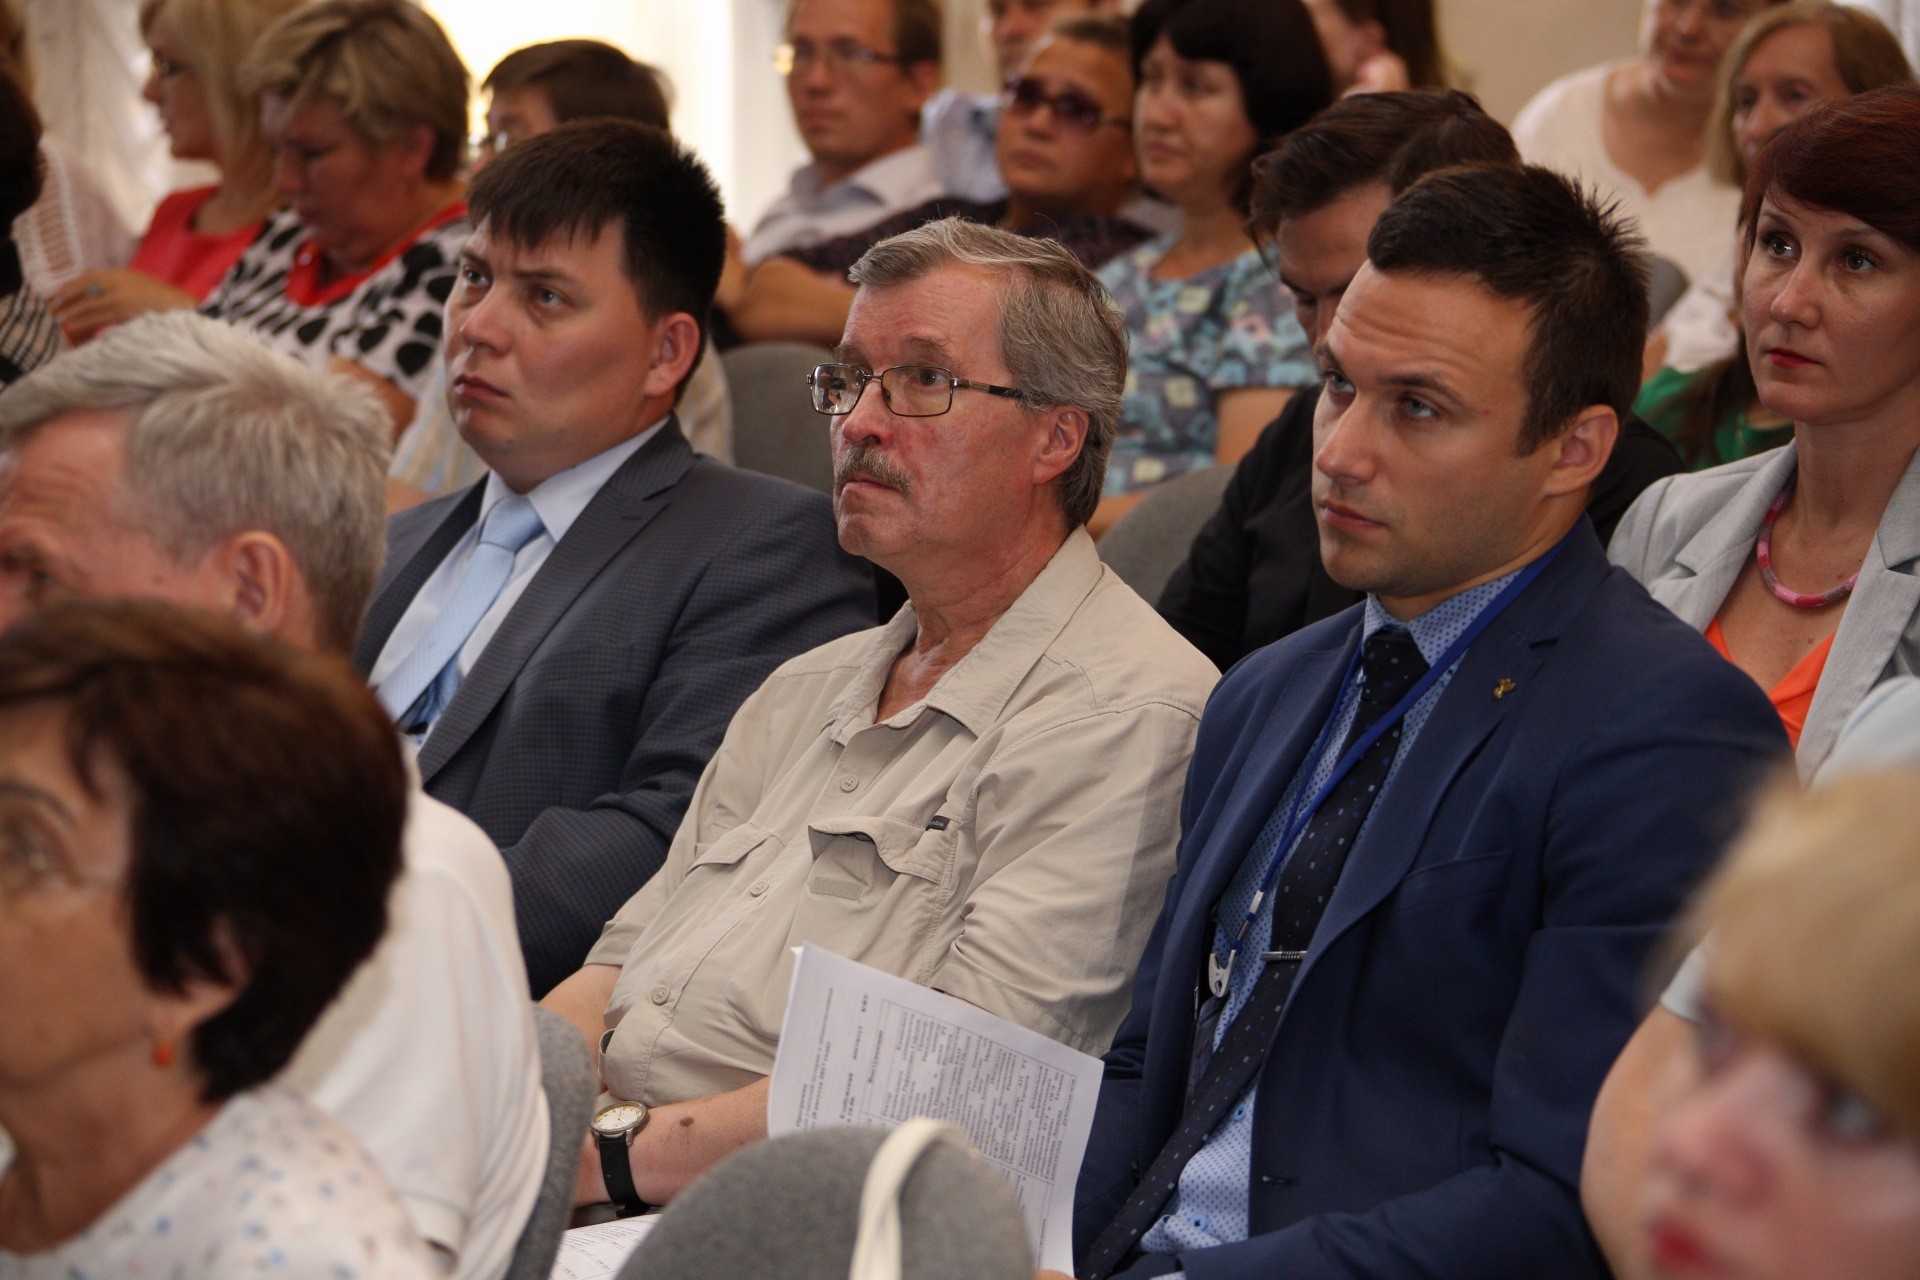 A plenary session of the I Congress of Teachers of History and Social Studies of the Republic of Tatarstan was held in Elabuga Institute of KFU